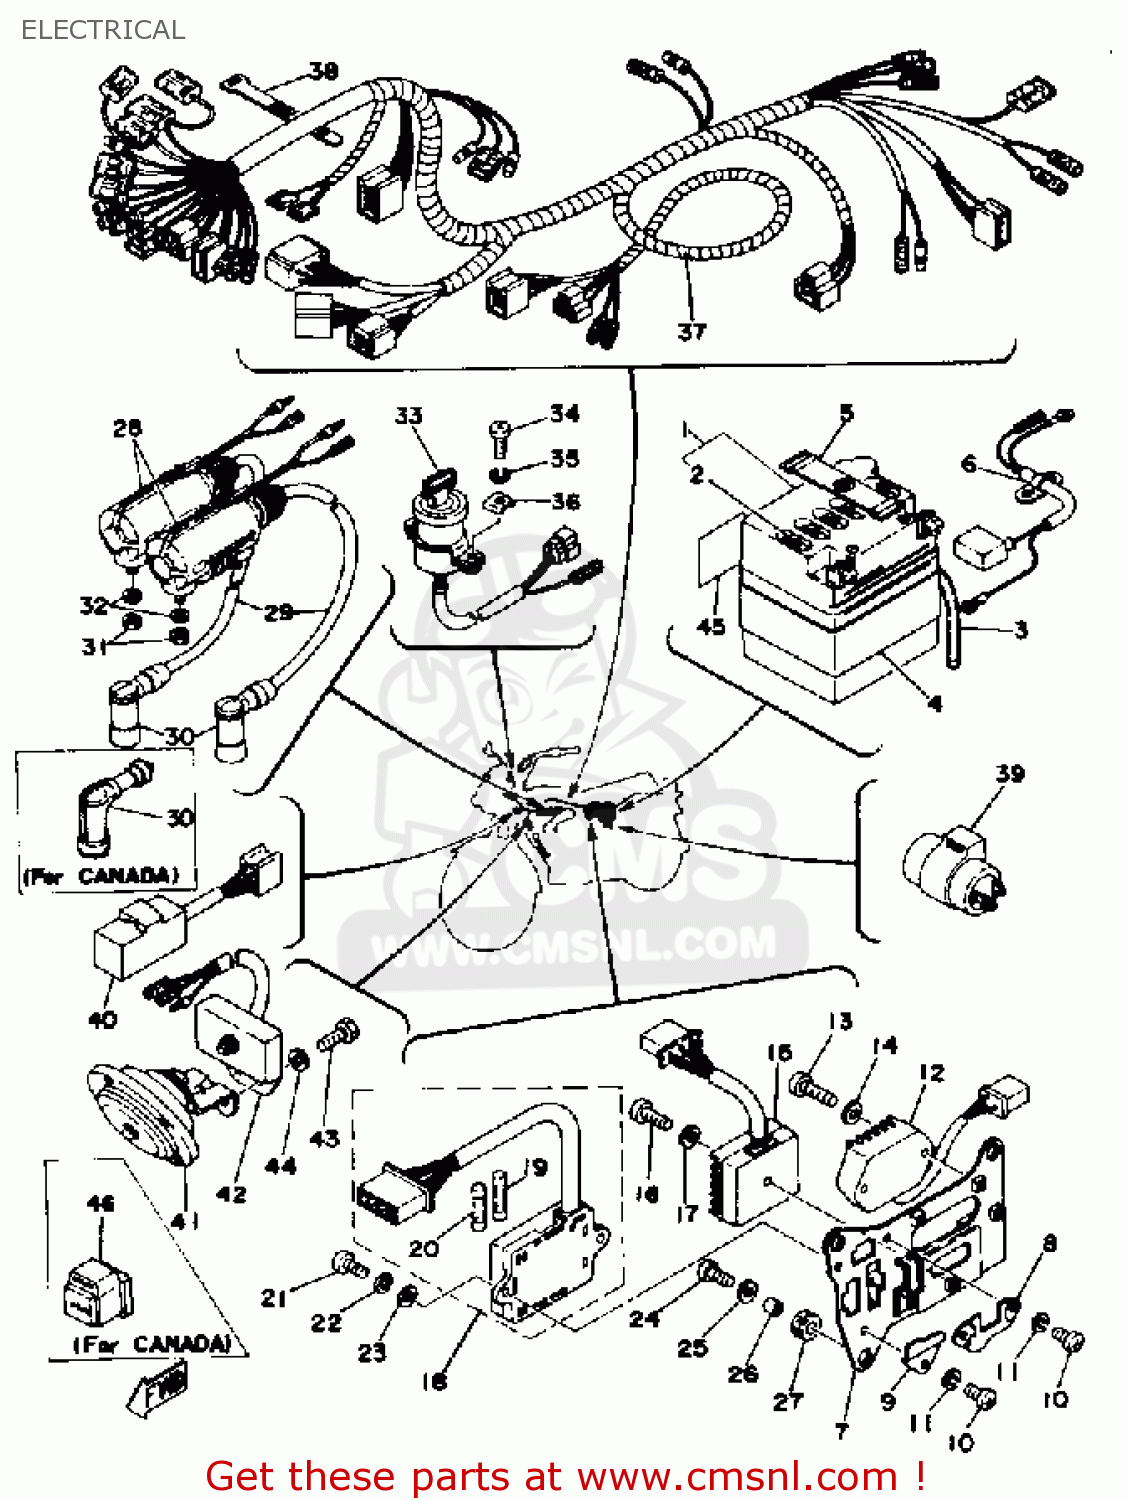 Yamaha Rd400 1976 Usa Electrical - schematic partsfiche rd350 wiring diagram 